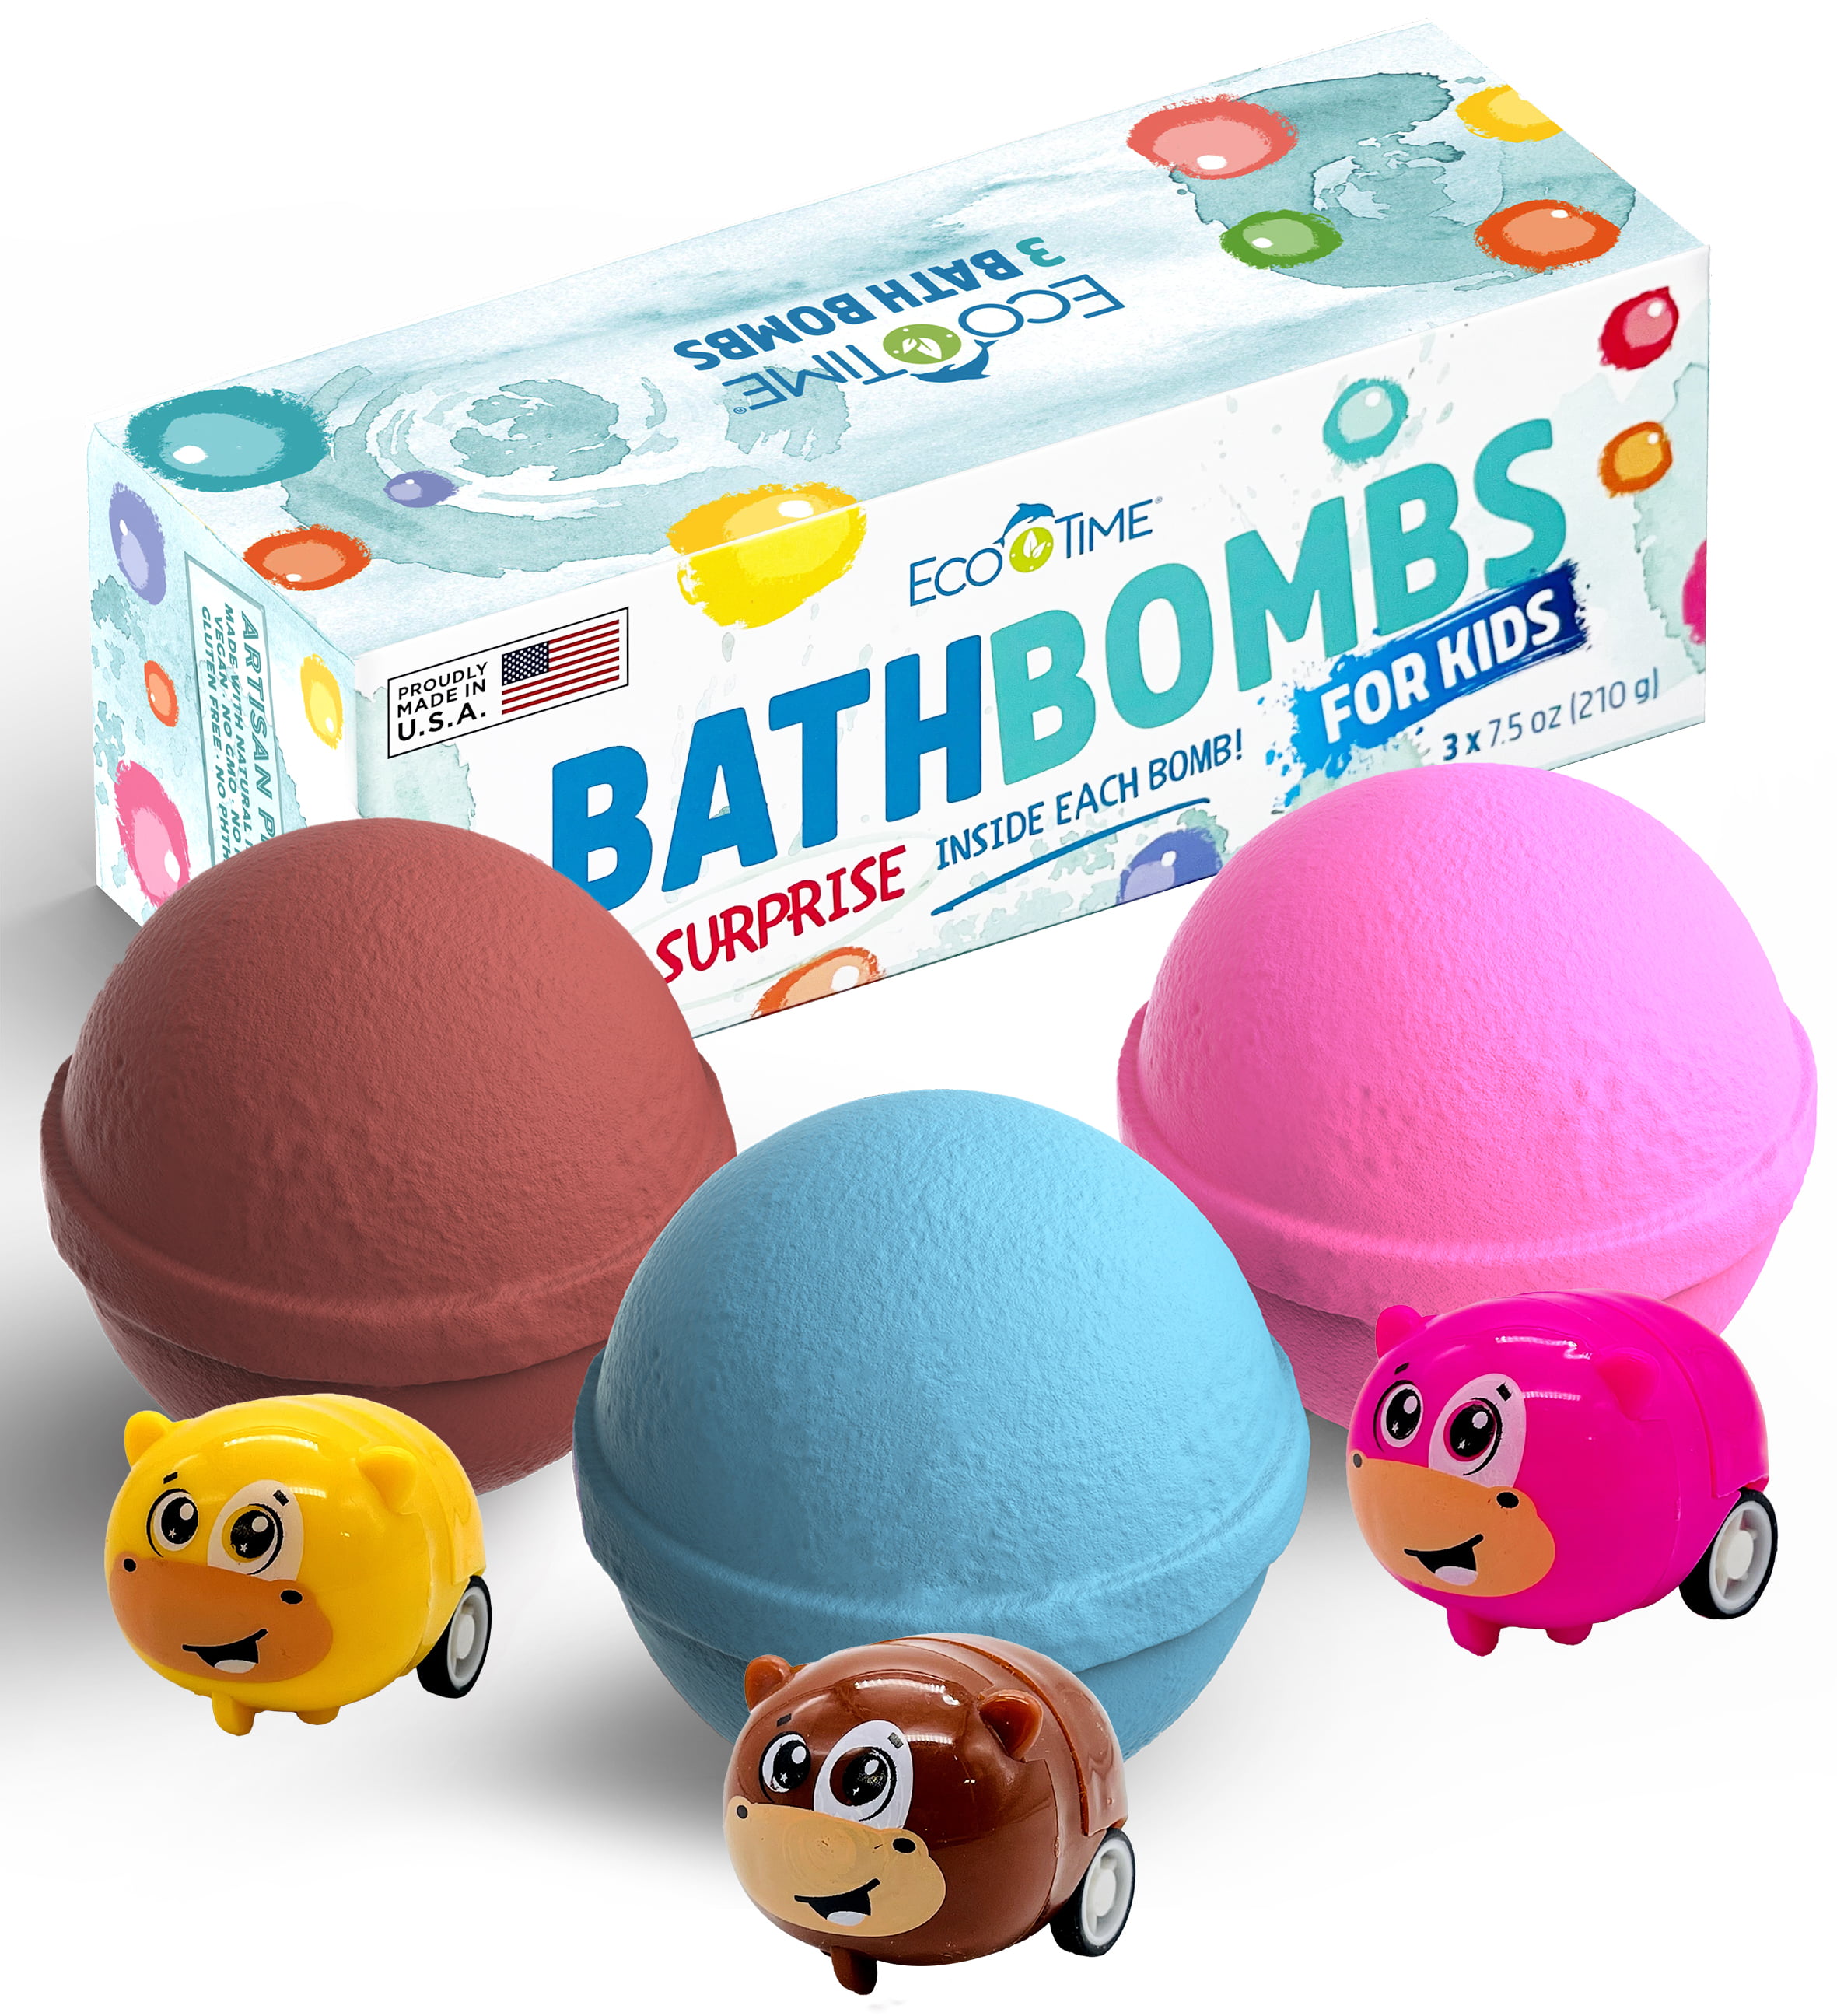 Bath Bombs for Kids - Extra Large 6pc Organic Bath Bombs with Mermaid Toys  - Handmade Fun Fizzies with Natural Essential Oils - Moisturizing Kids Bath  Bombs for Girls, Birthday Gifts, Christmas